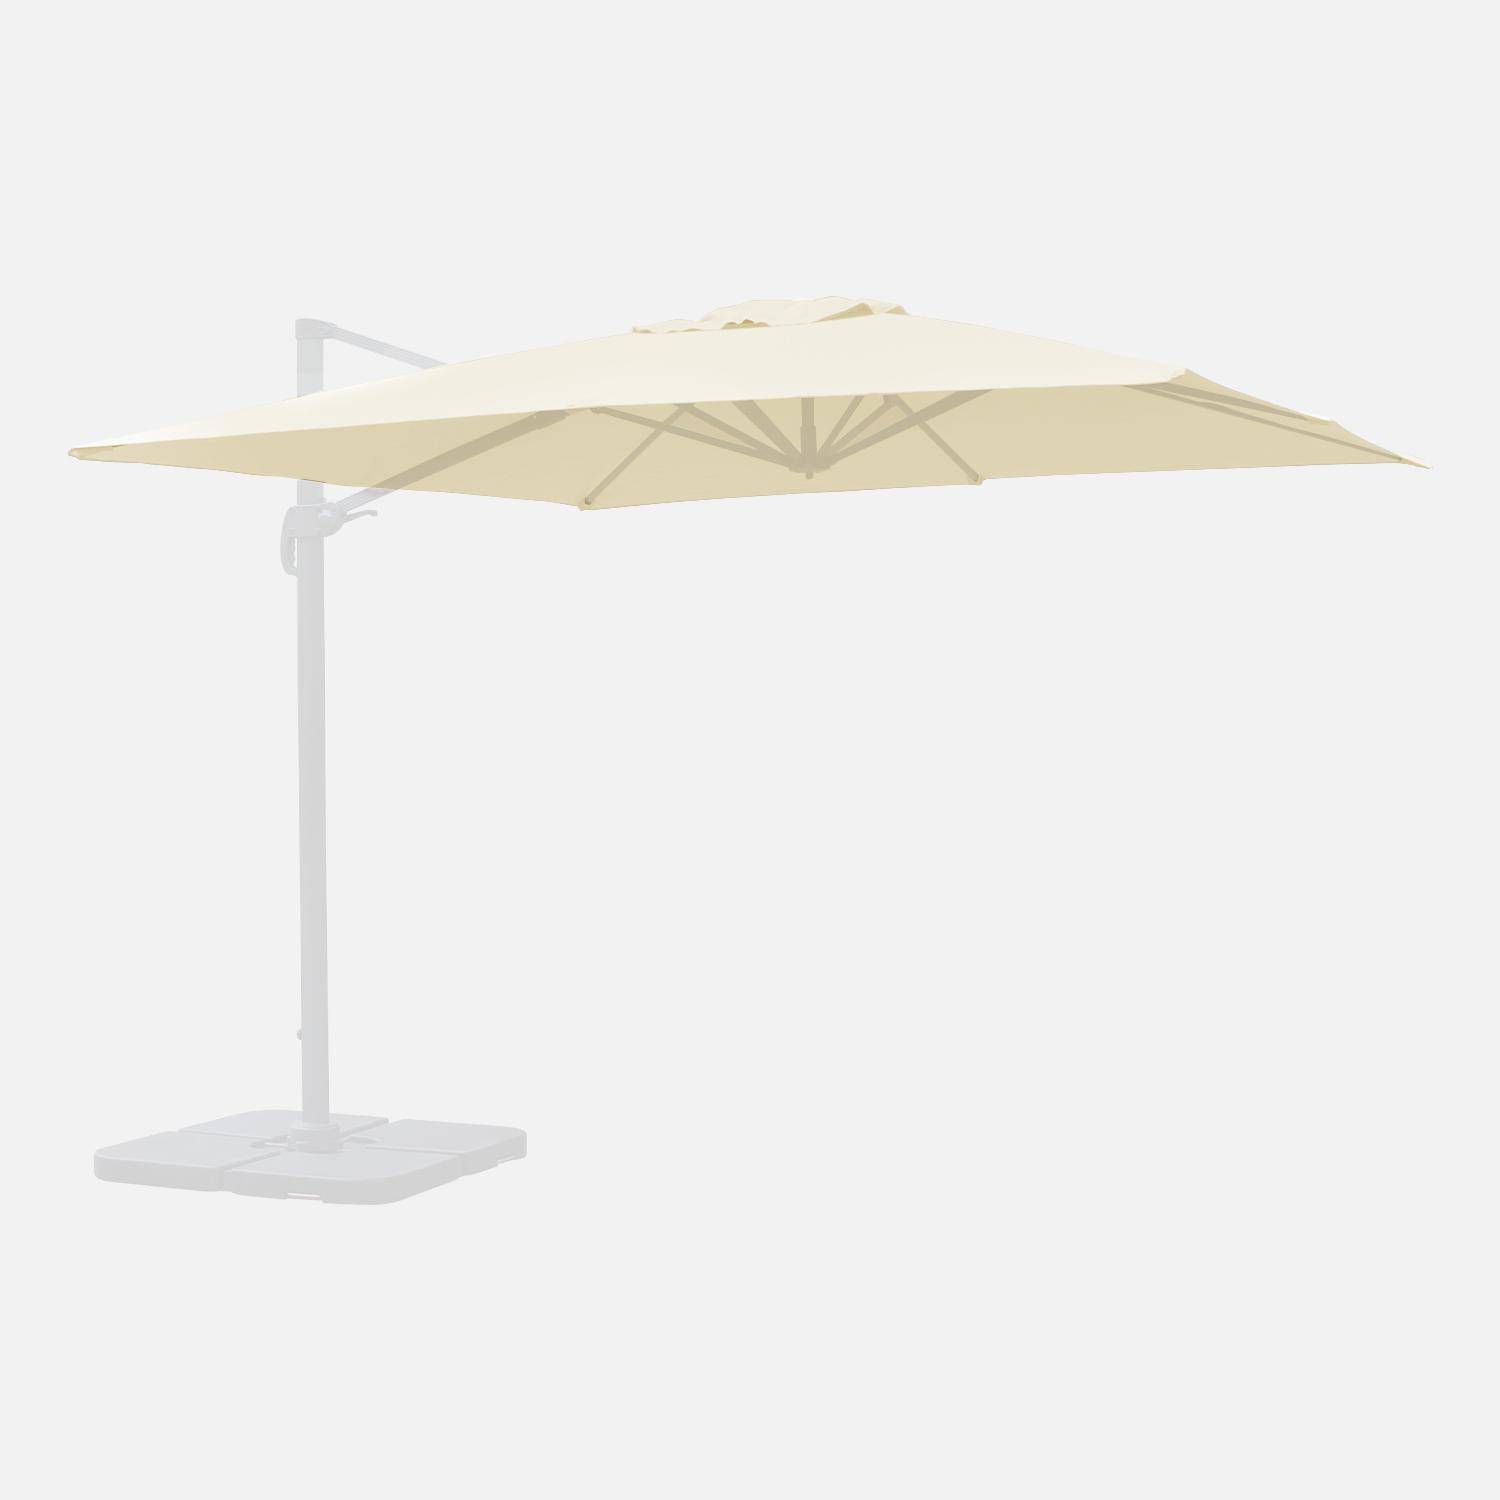 Off-white 3x3m canopy for the Falgos parasol - replacement canopy Photo3